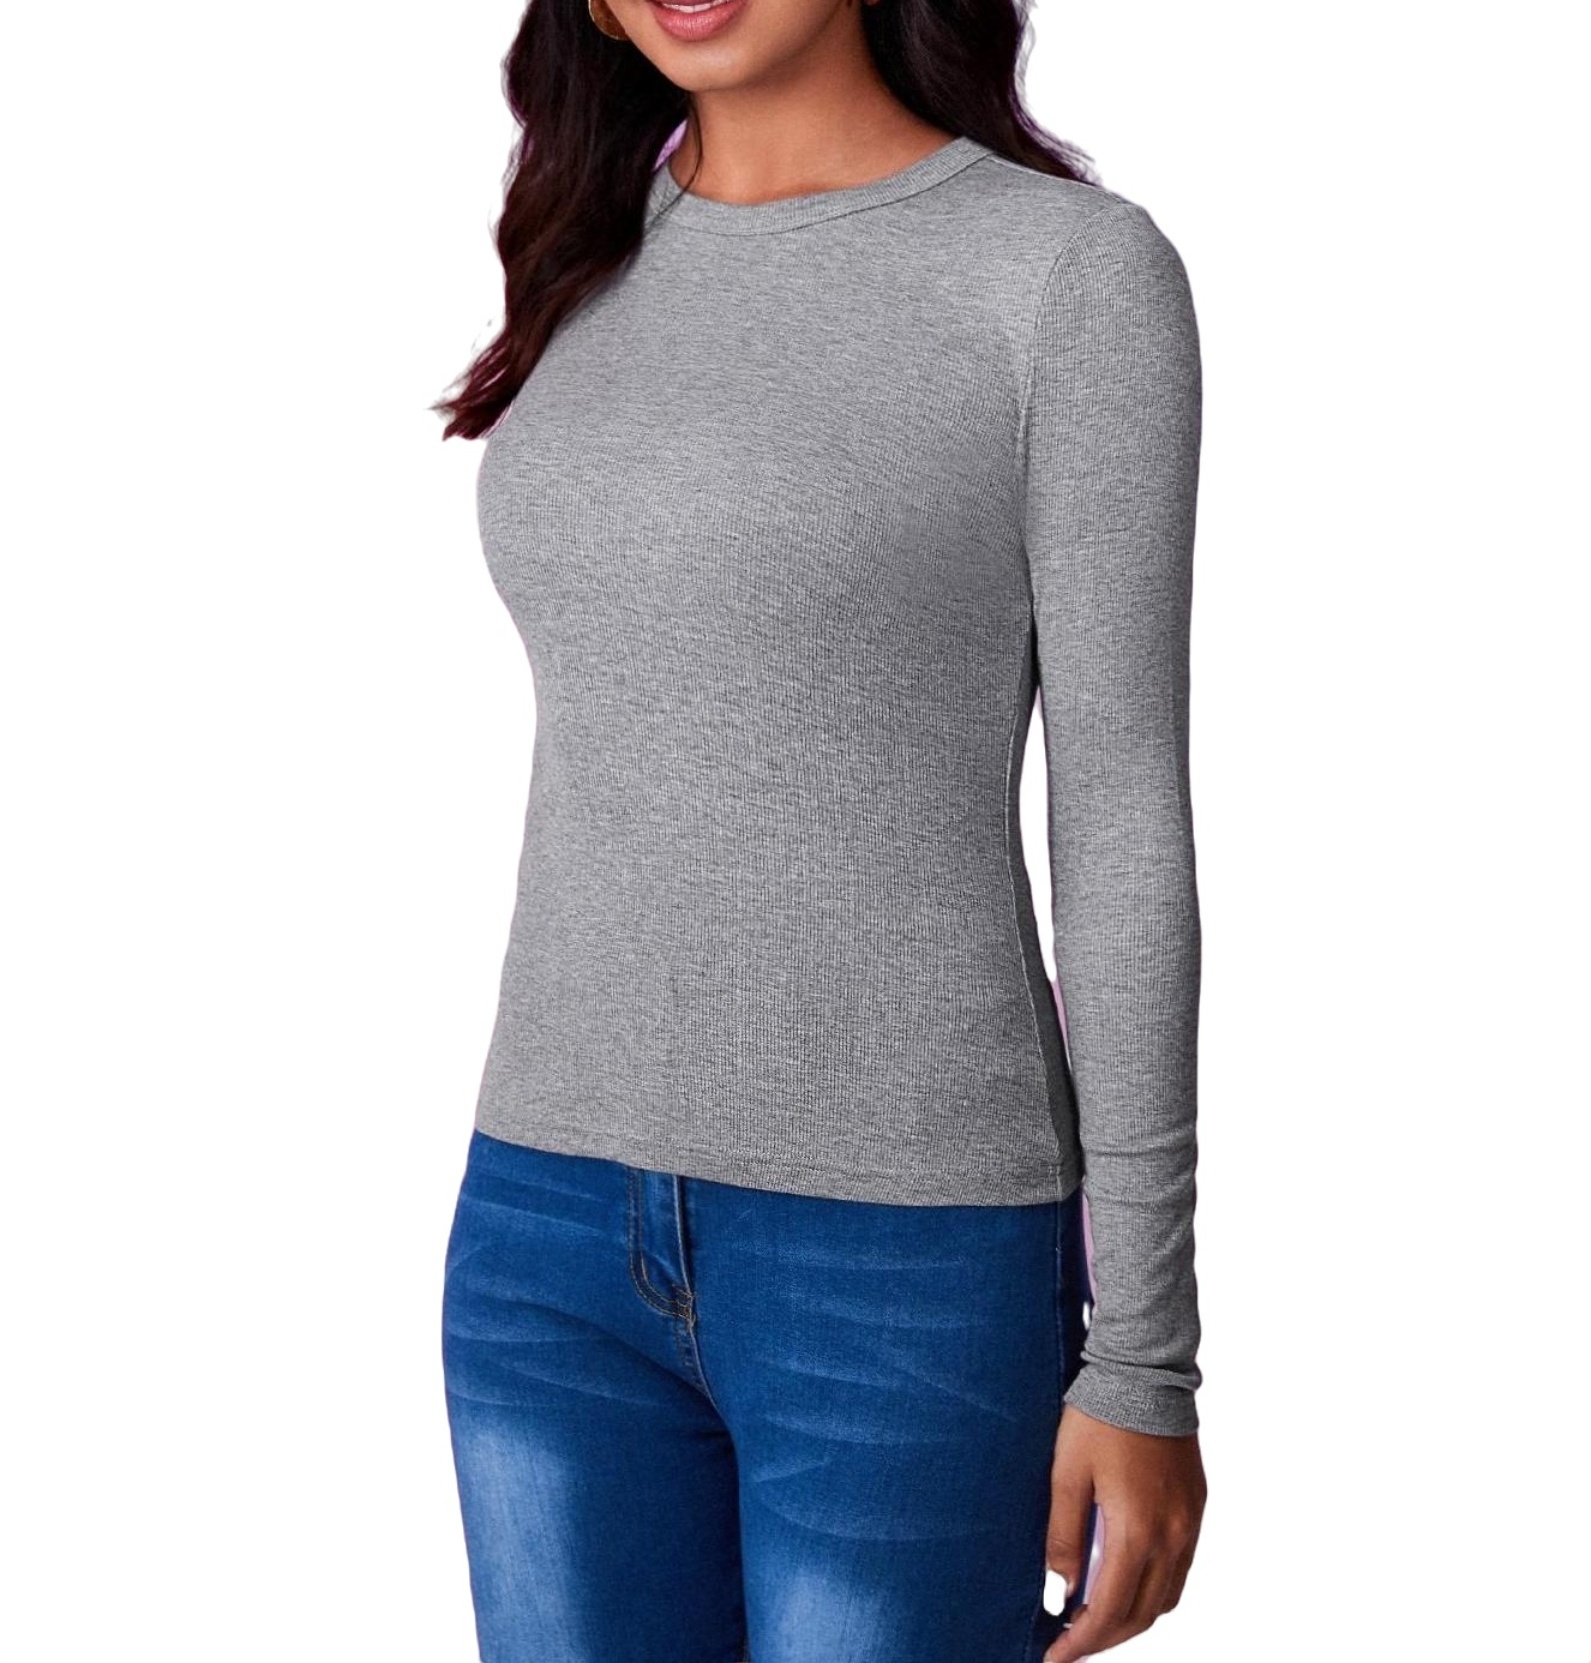 Casual Solid Round Neck Tee Long Sleeve Grey Women T-Shirts (Women's ...